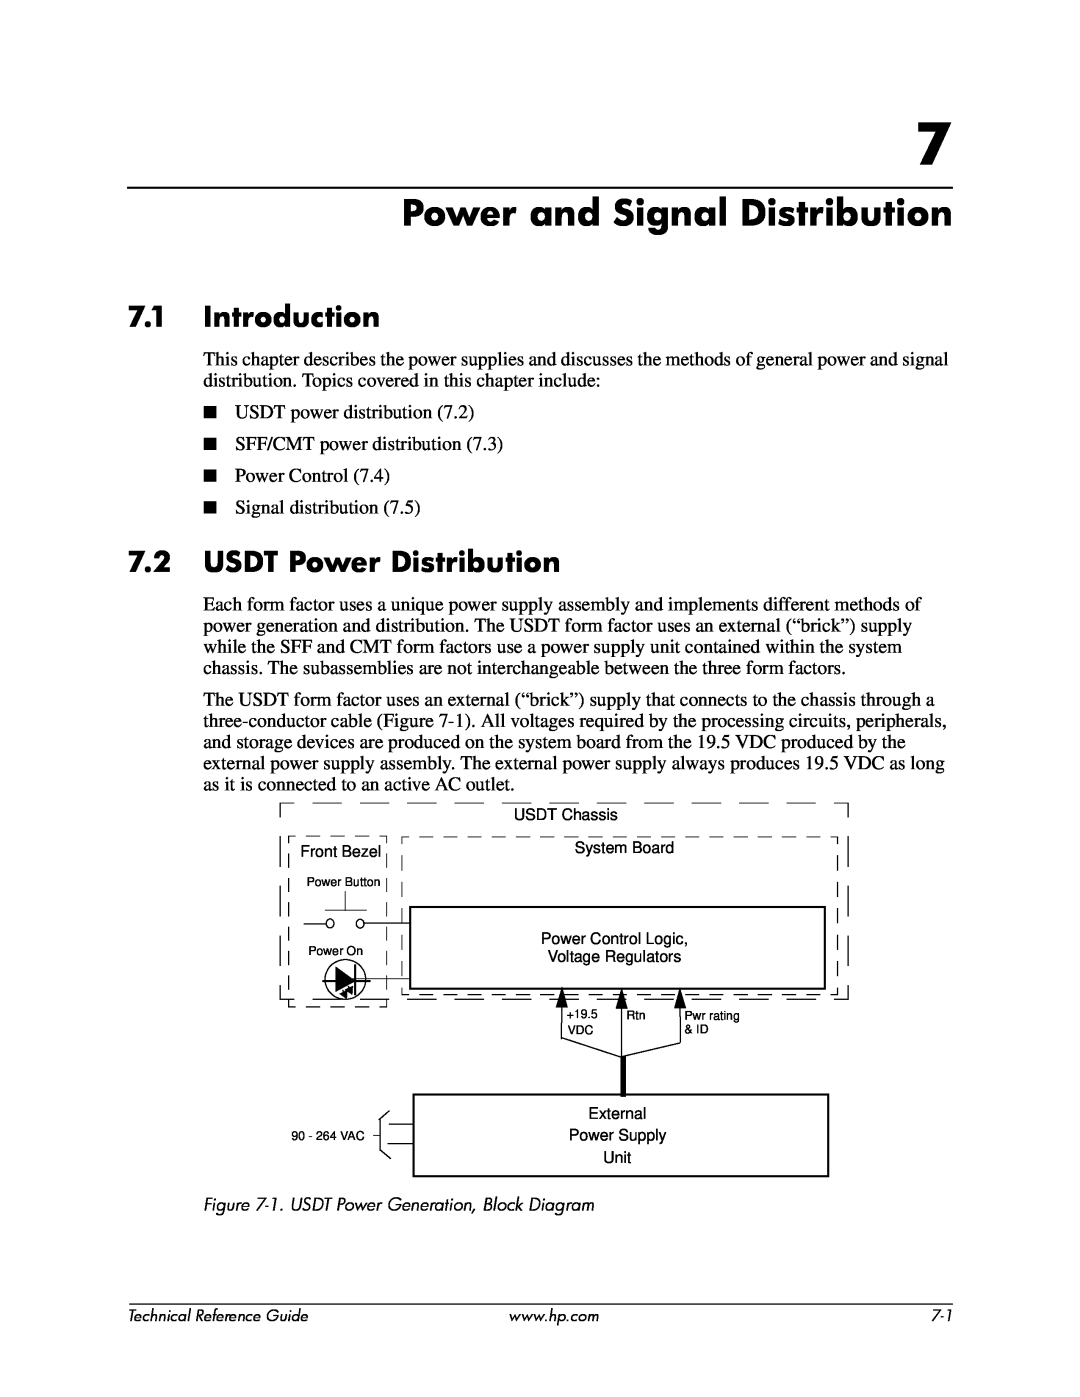 HP 8000 tower manual Power and Signal Distribution, Introduction, USDT Power Distribution 